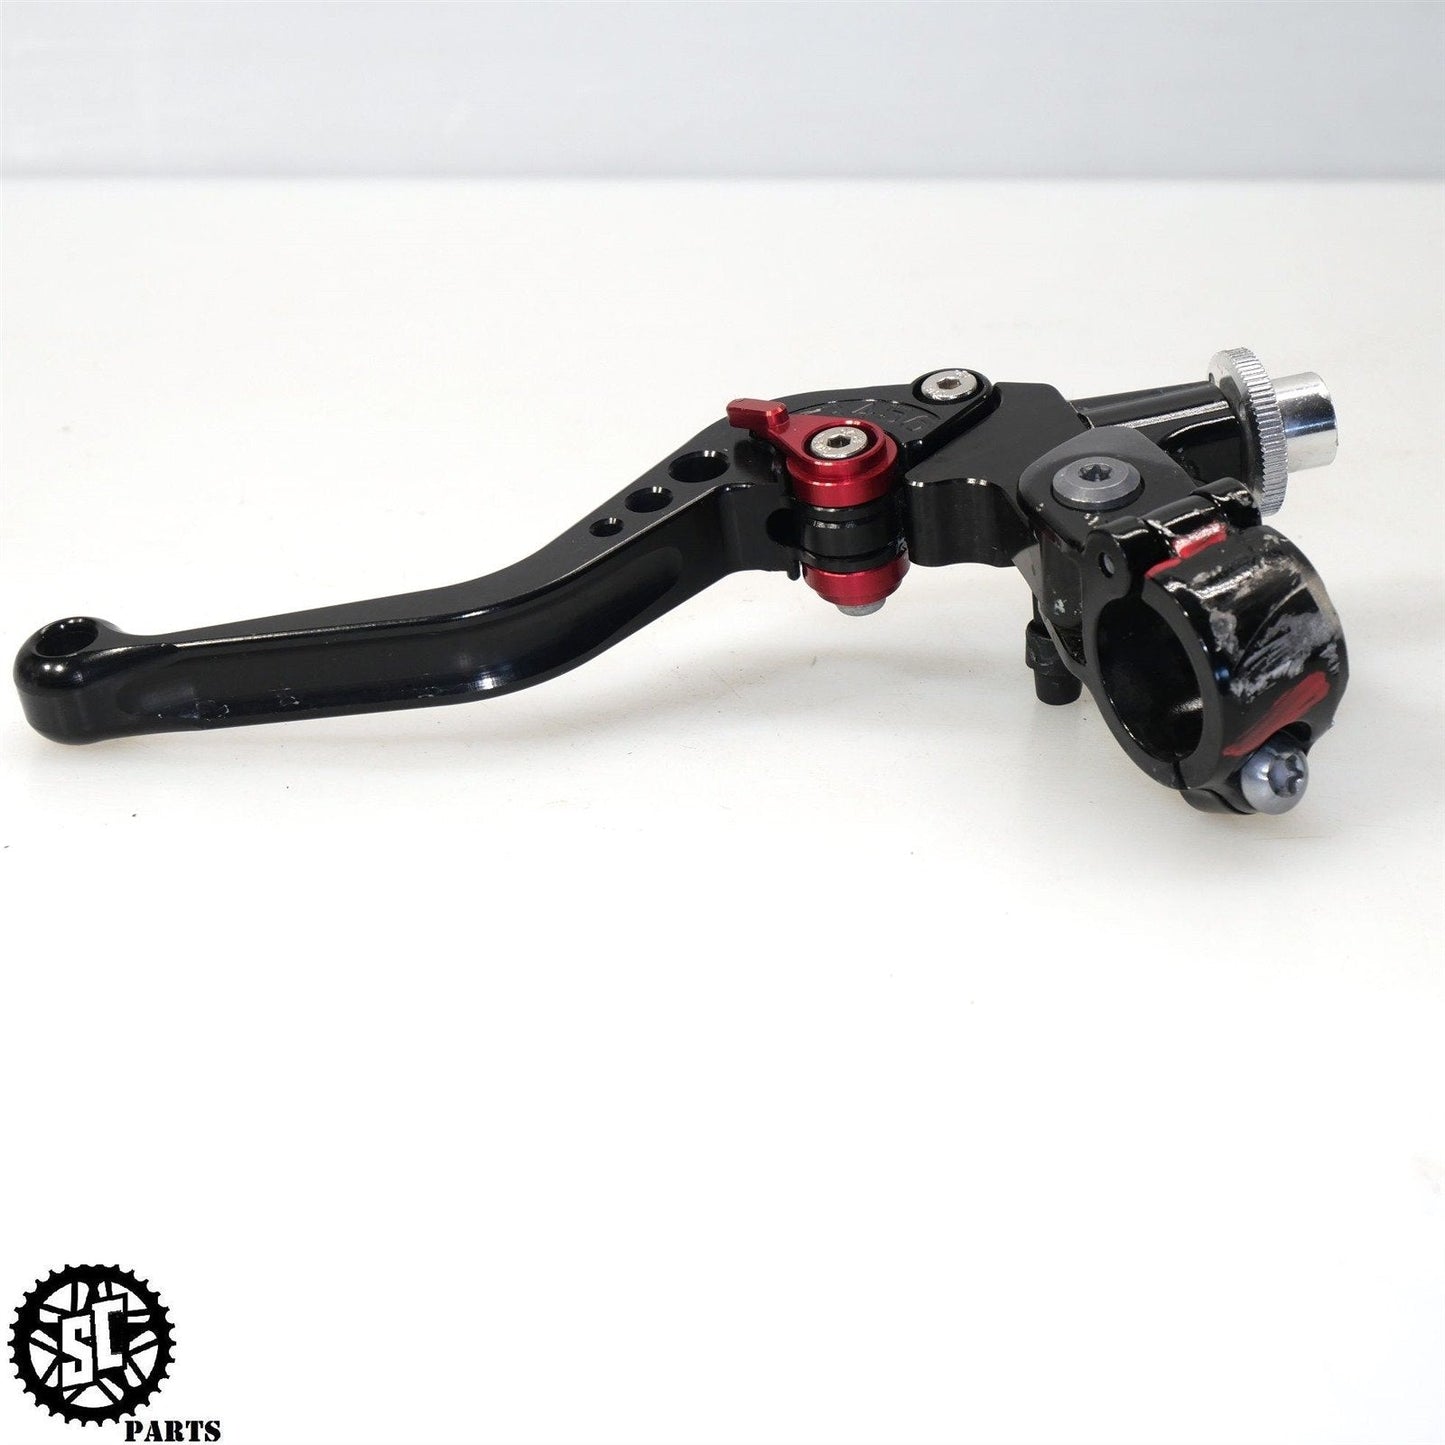 2015-2018 BMW S1000RR FRONT BRAKE MASTER CYLINDER PAZZO CLUTCH LEVER B37